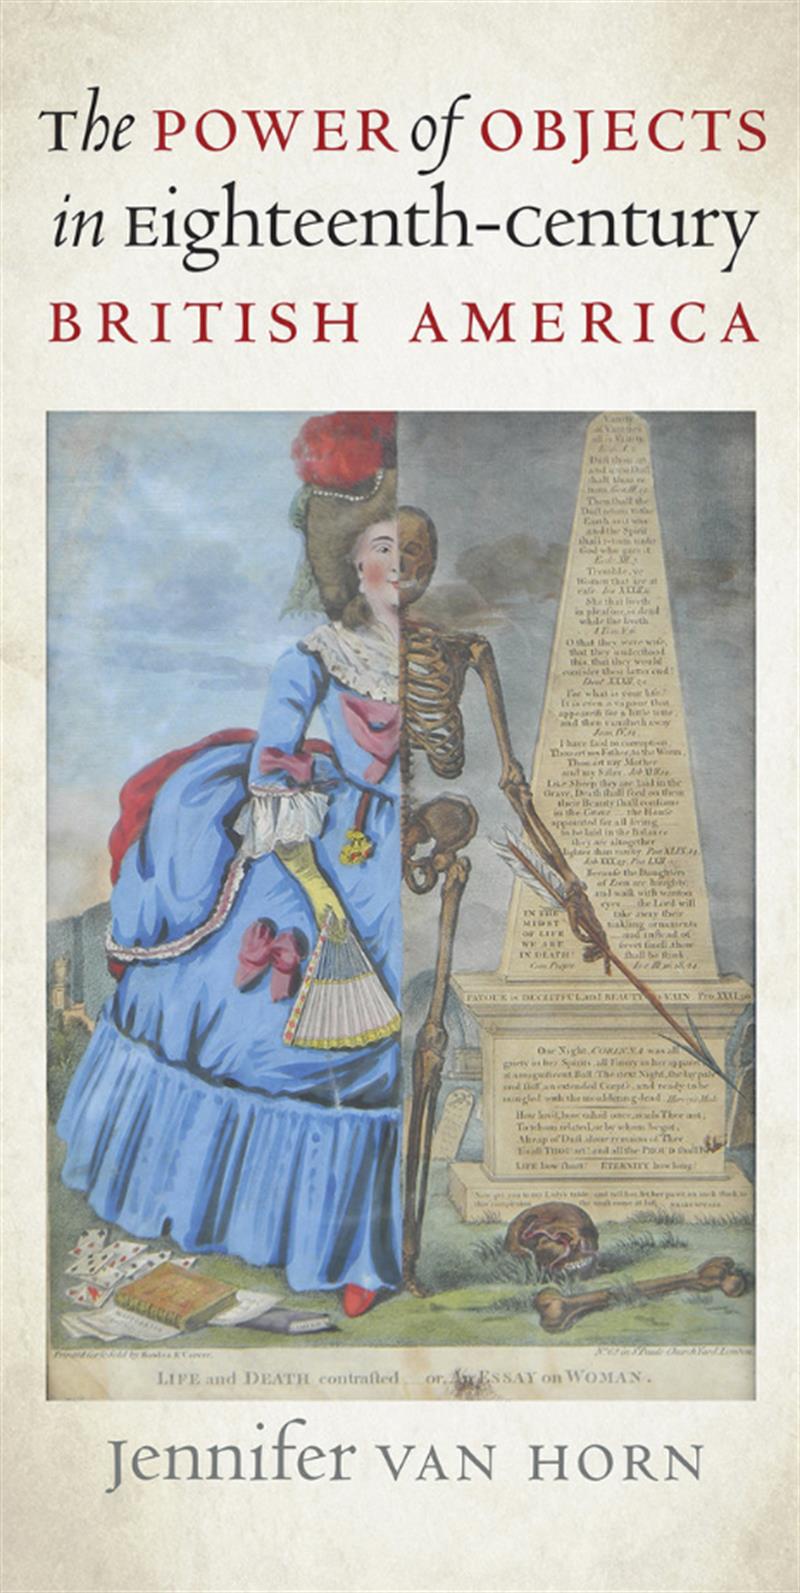 Cover of the book, "The Power of Objects in Eighteenth-Century British America"